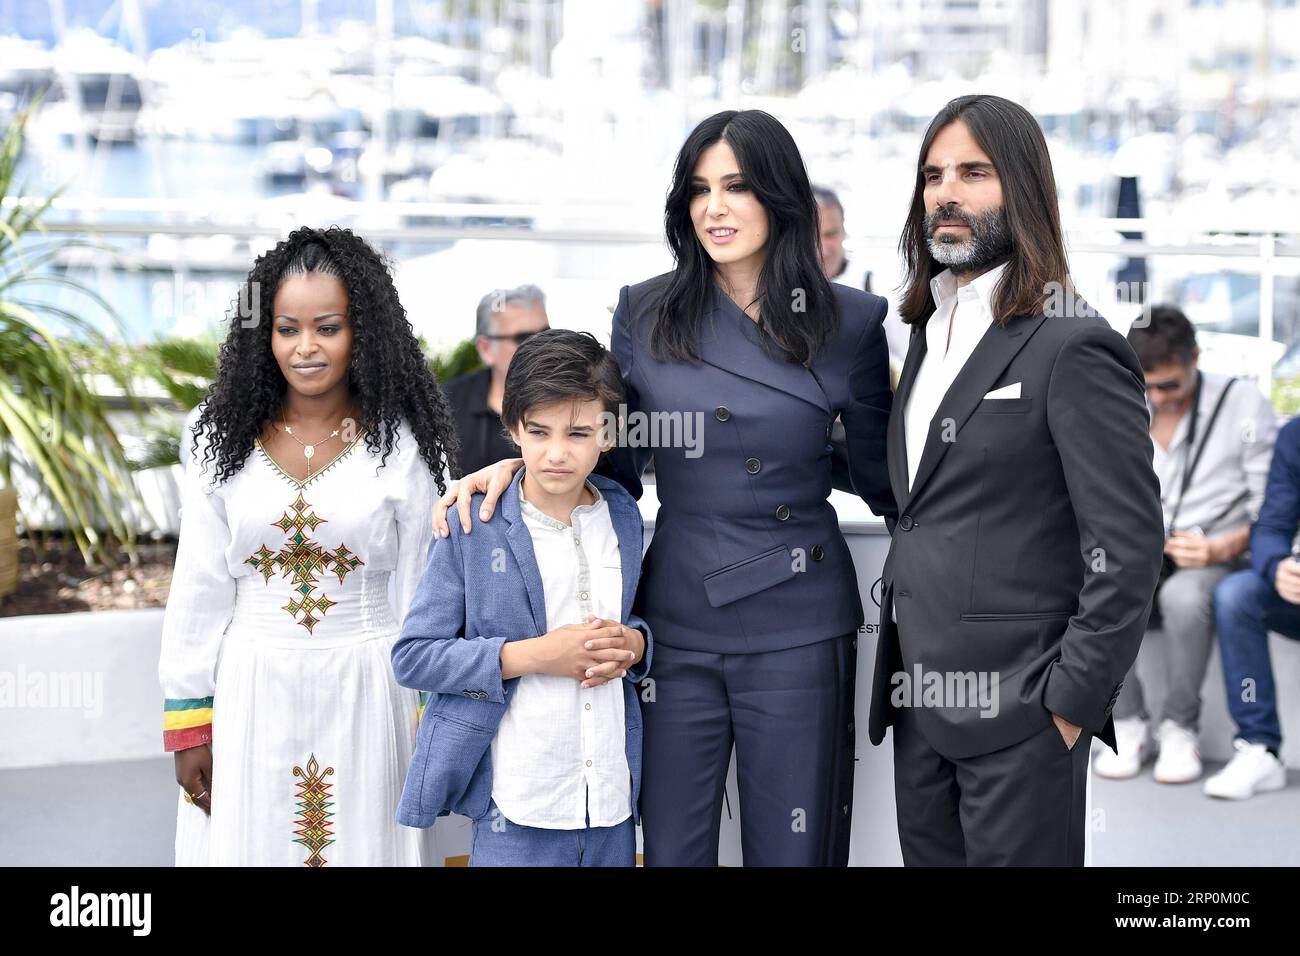 (180518) -- CANNES, May 18, 2018 -- Actress Yordanos Shiferaw, actor Zain Al Rafeea, director Nadine Labaki and actor Khaled Mouzanar (L to R) of the Lebanese film Capernaum , pose during a photocall of the 71st Cannes International Film Festival in Cannes, France on May 18, 2018. The 71st Cannes International Film Festival is held from May 8 to May 19. ) (wtc) FRANCE-CANNES-71ST INTERNATIONAL FILM FESTIVAL-CAPERNAUM-PHOTOCALL ChenxYichen PUBLICATIONxNOTxINxCHN Stock Photo